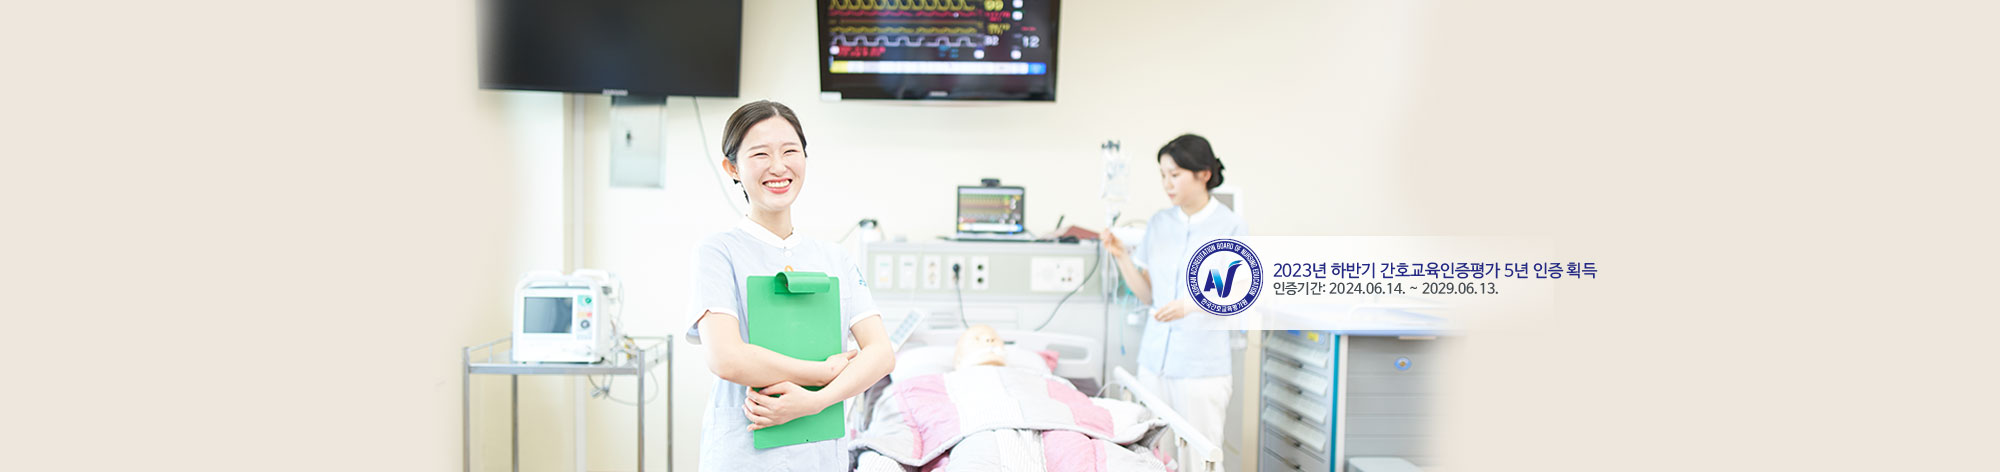 The Best Nursing with Passion! 울산과학대학교 간호학부